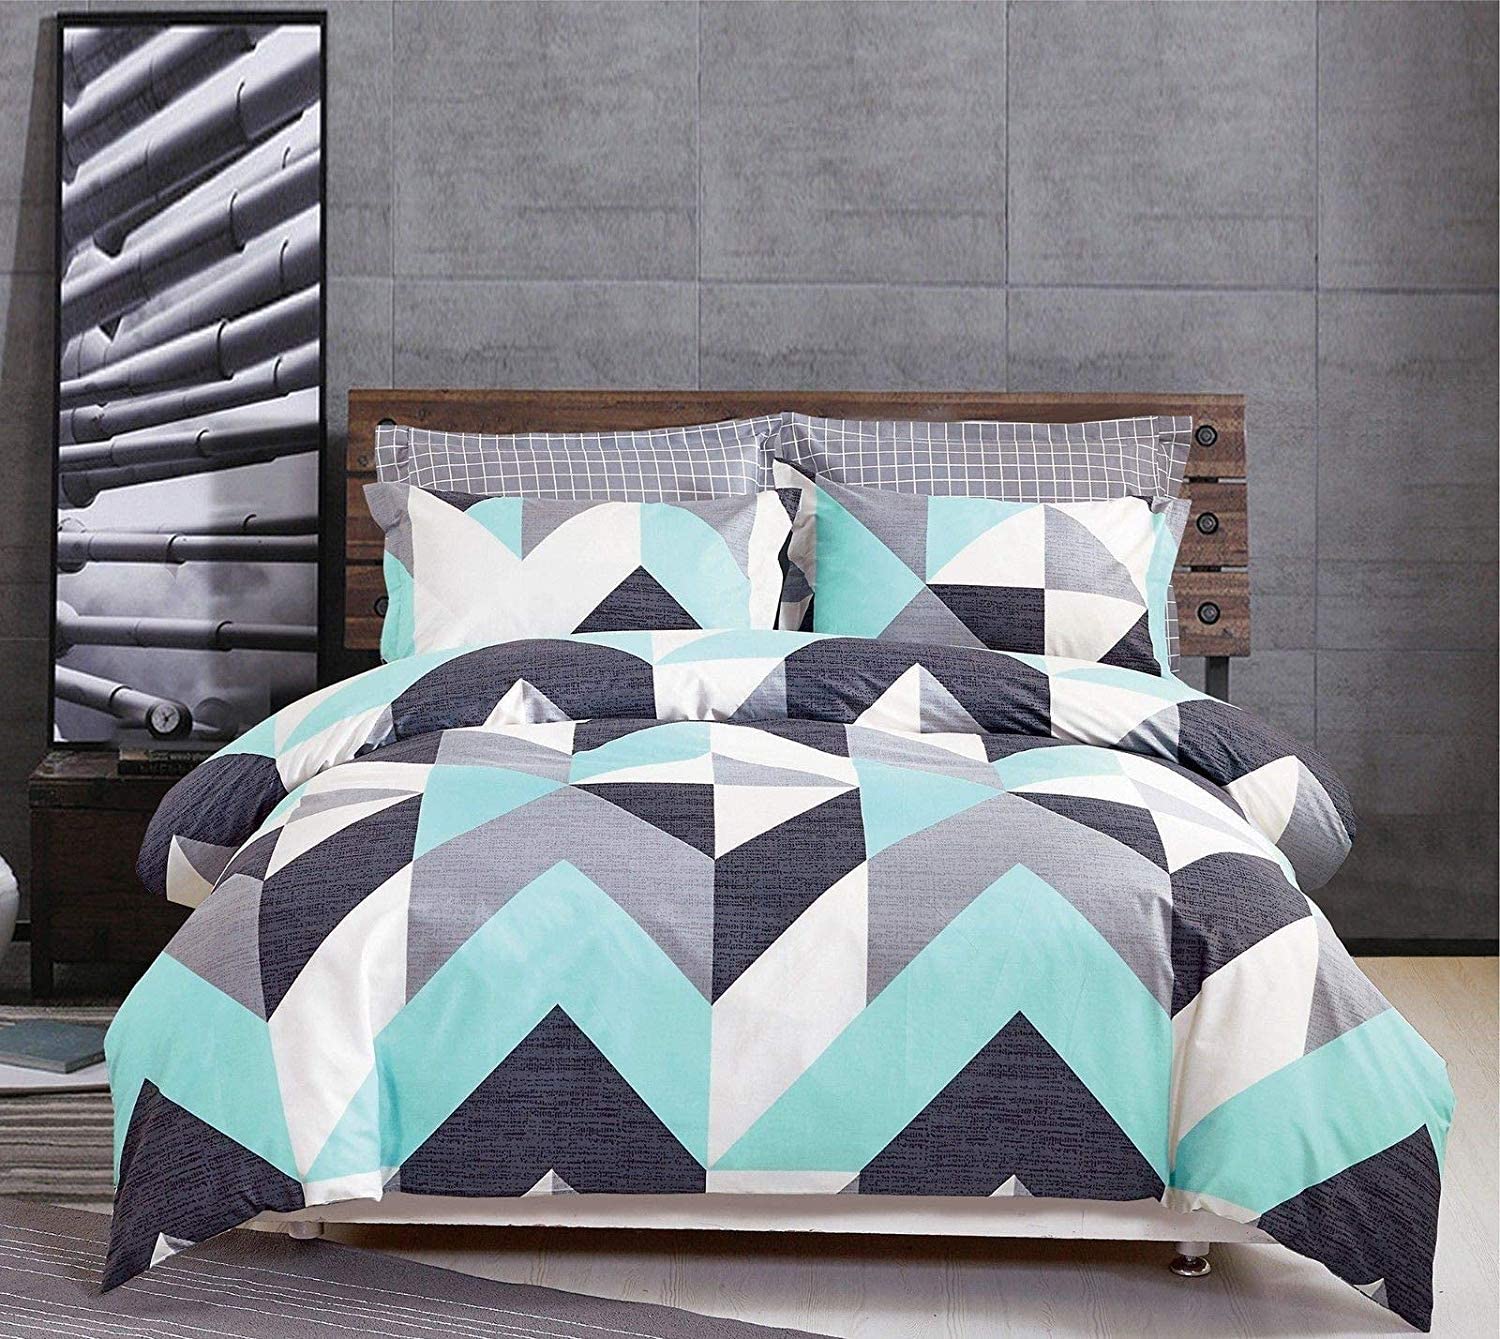 100% Cotton Modern City Reversible Quilt Cover Set Queen/King Size